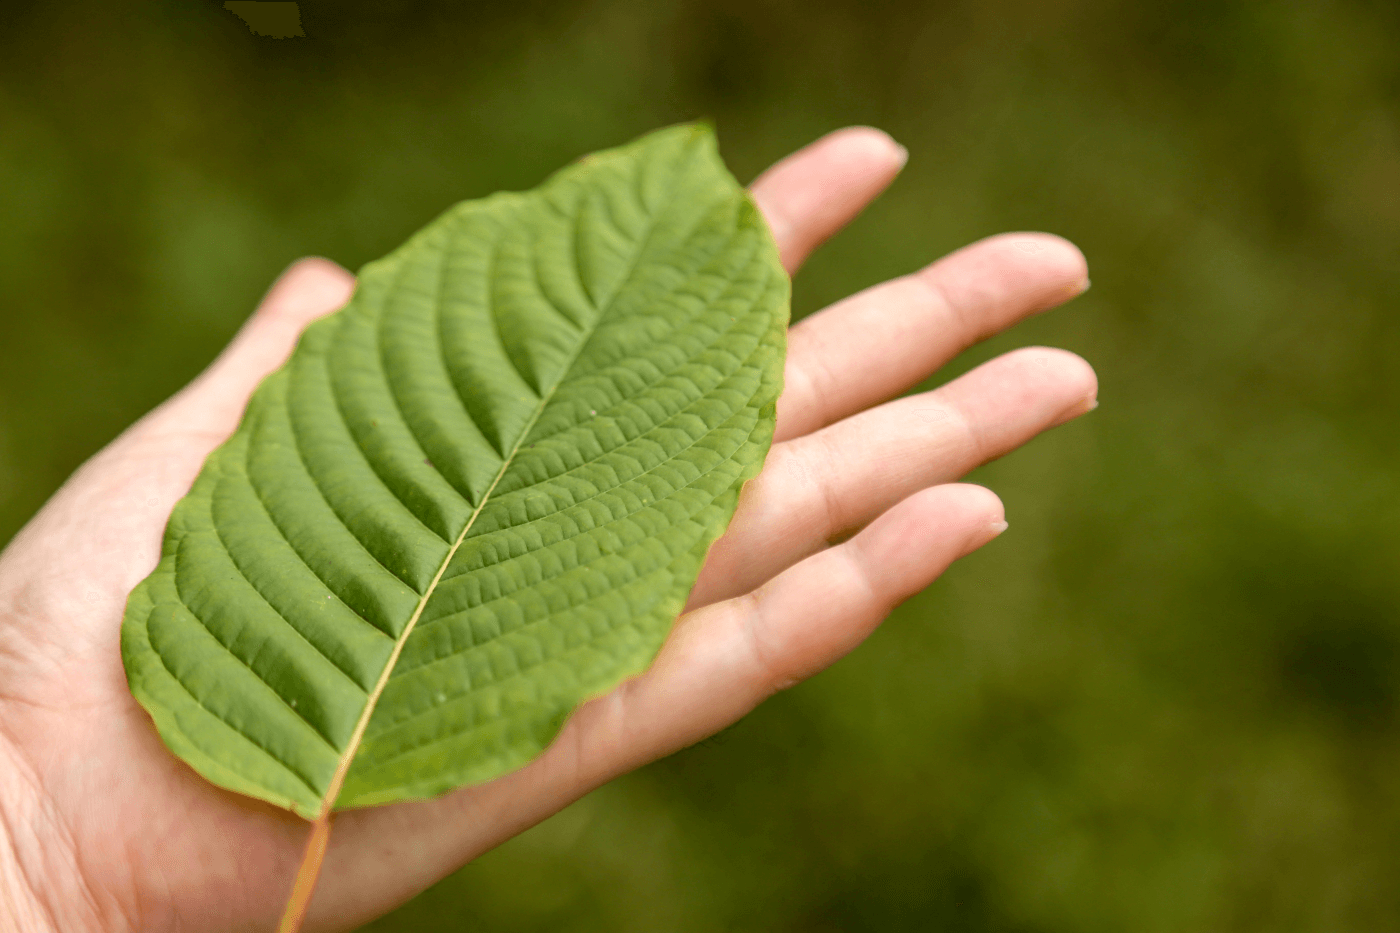 Kratom Country: Where Can I Get Real Kratom?